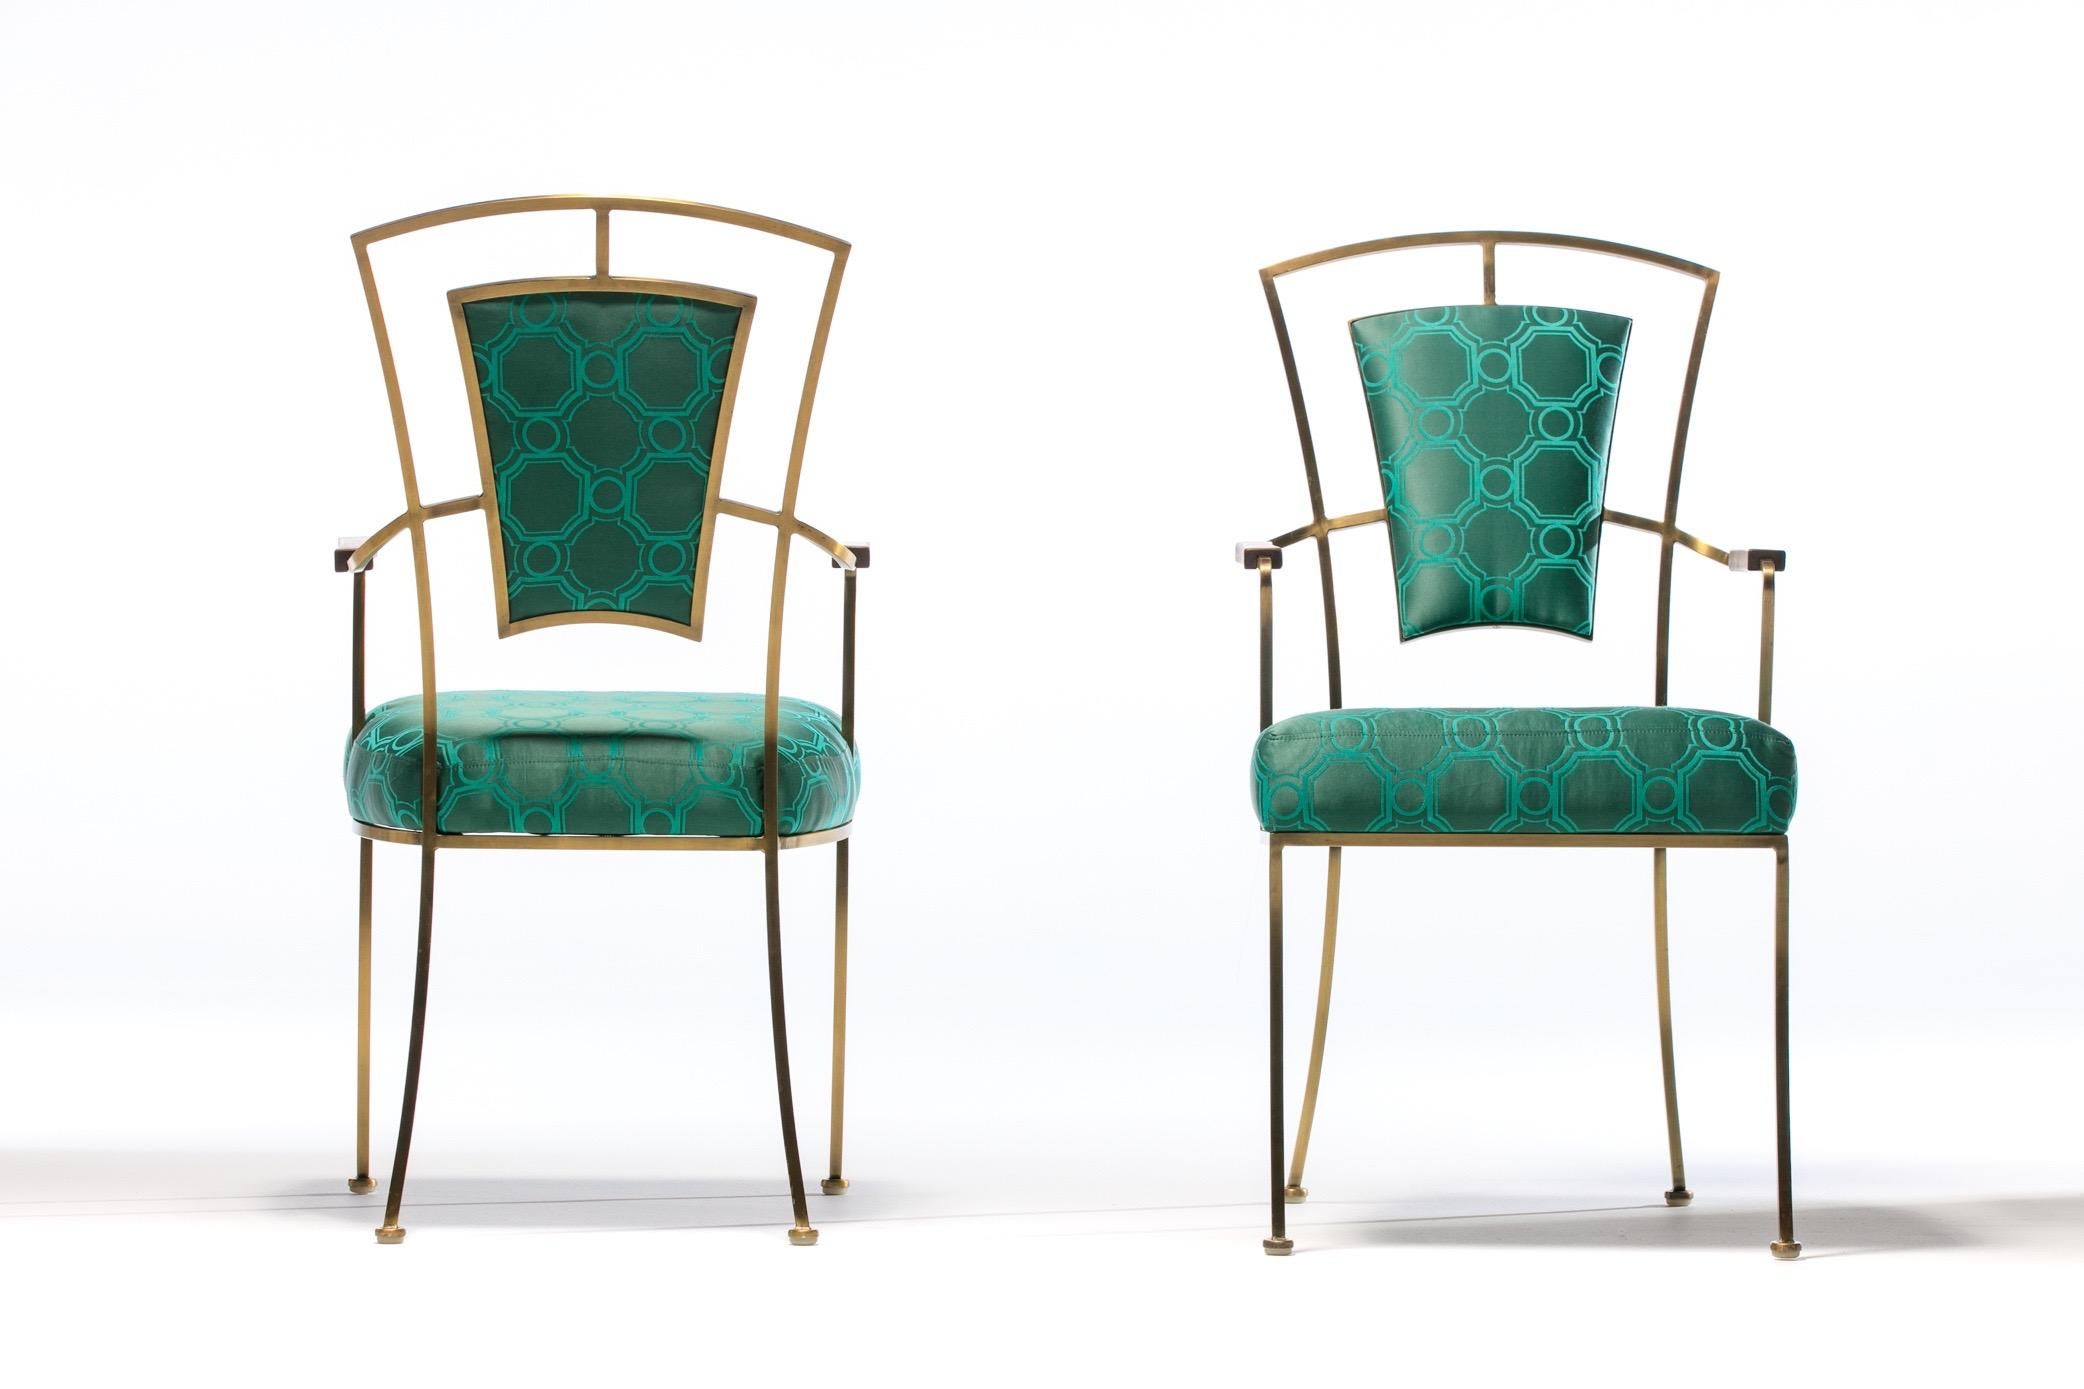 Sourced from a Beverly Hills estate and chic to the nines, this pair of 1960s Billy Haines style Hollywood Regency armchairs feature heavy duty solid brass frames with natural patina, walnut arm rests, and were professionally reupholstered in a Tony